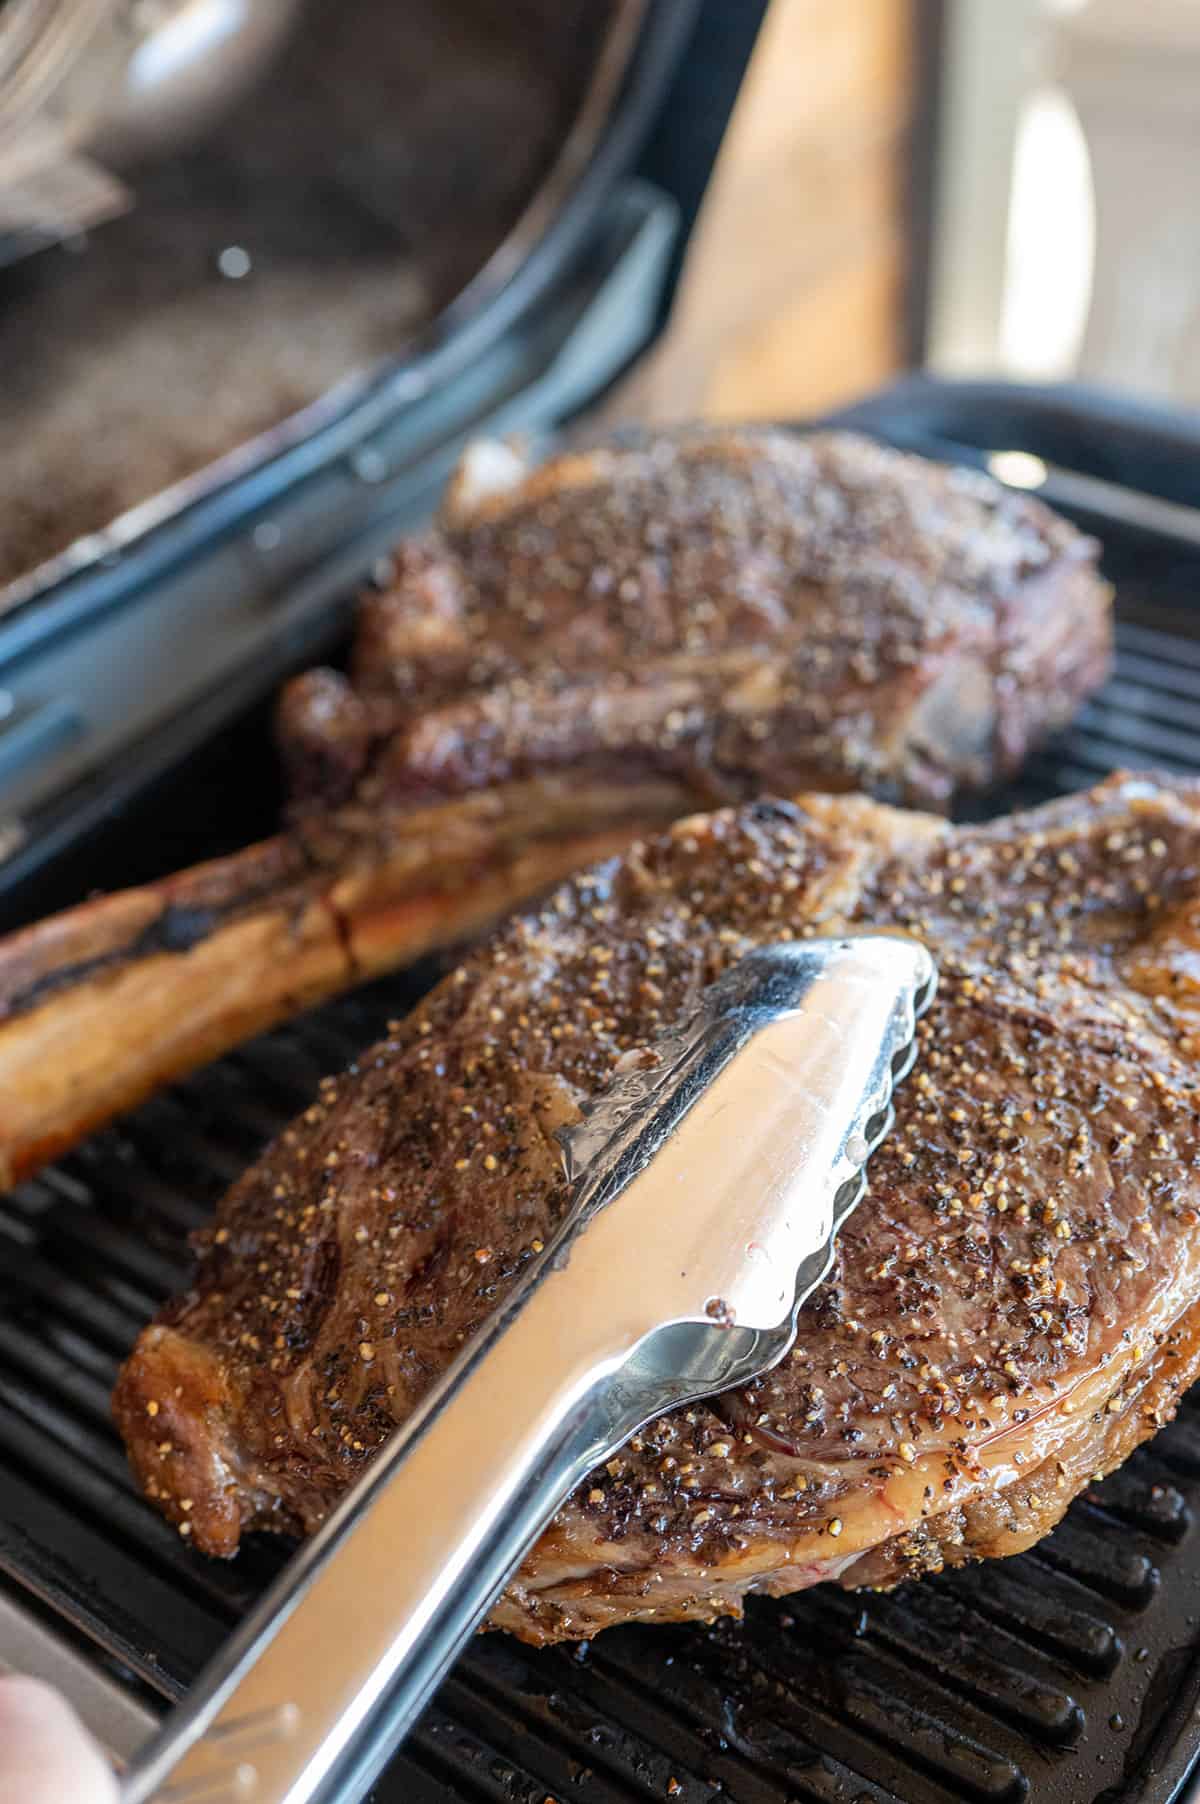 tongs pressing ribeye steak onto grill to form grill marks.